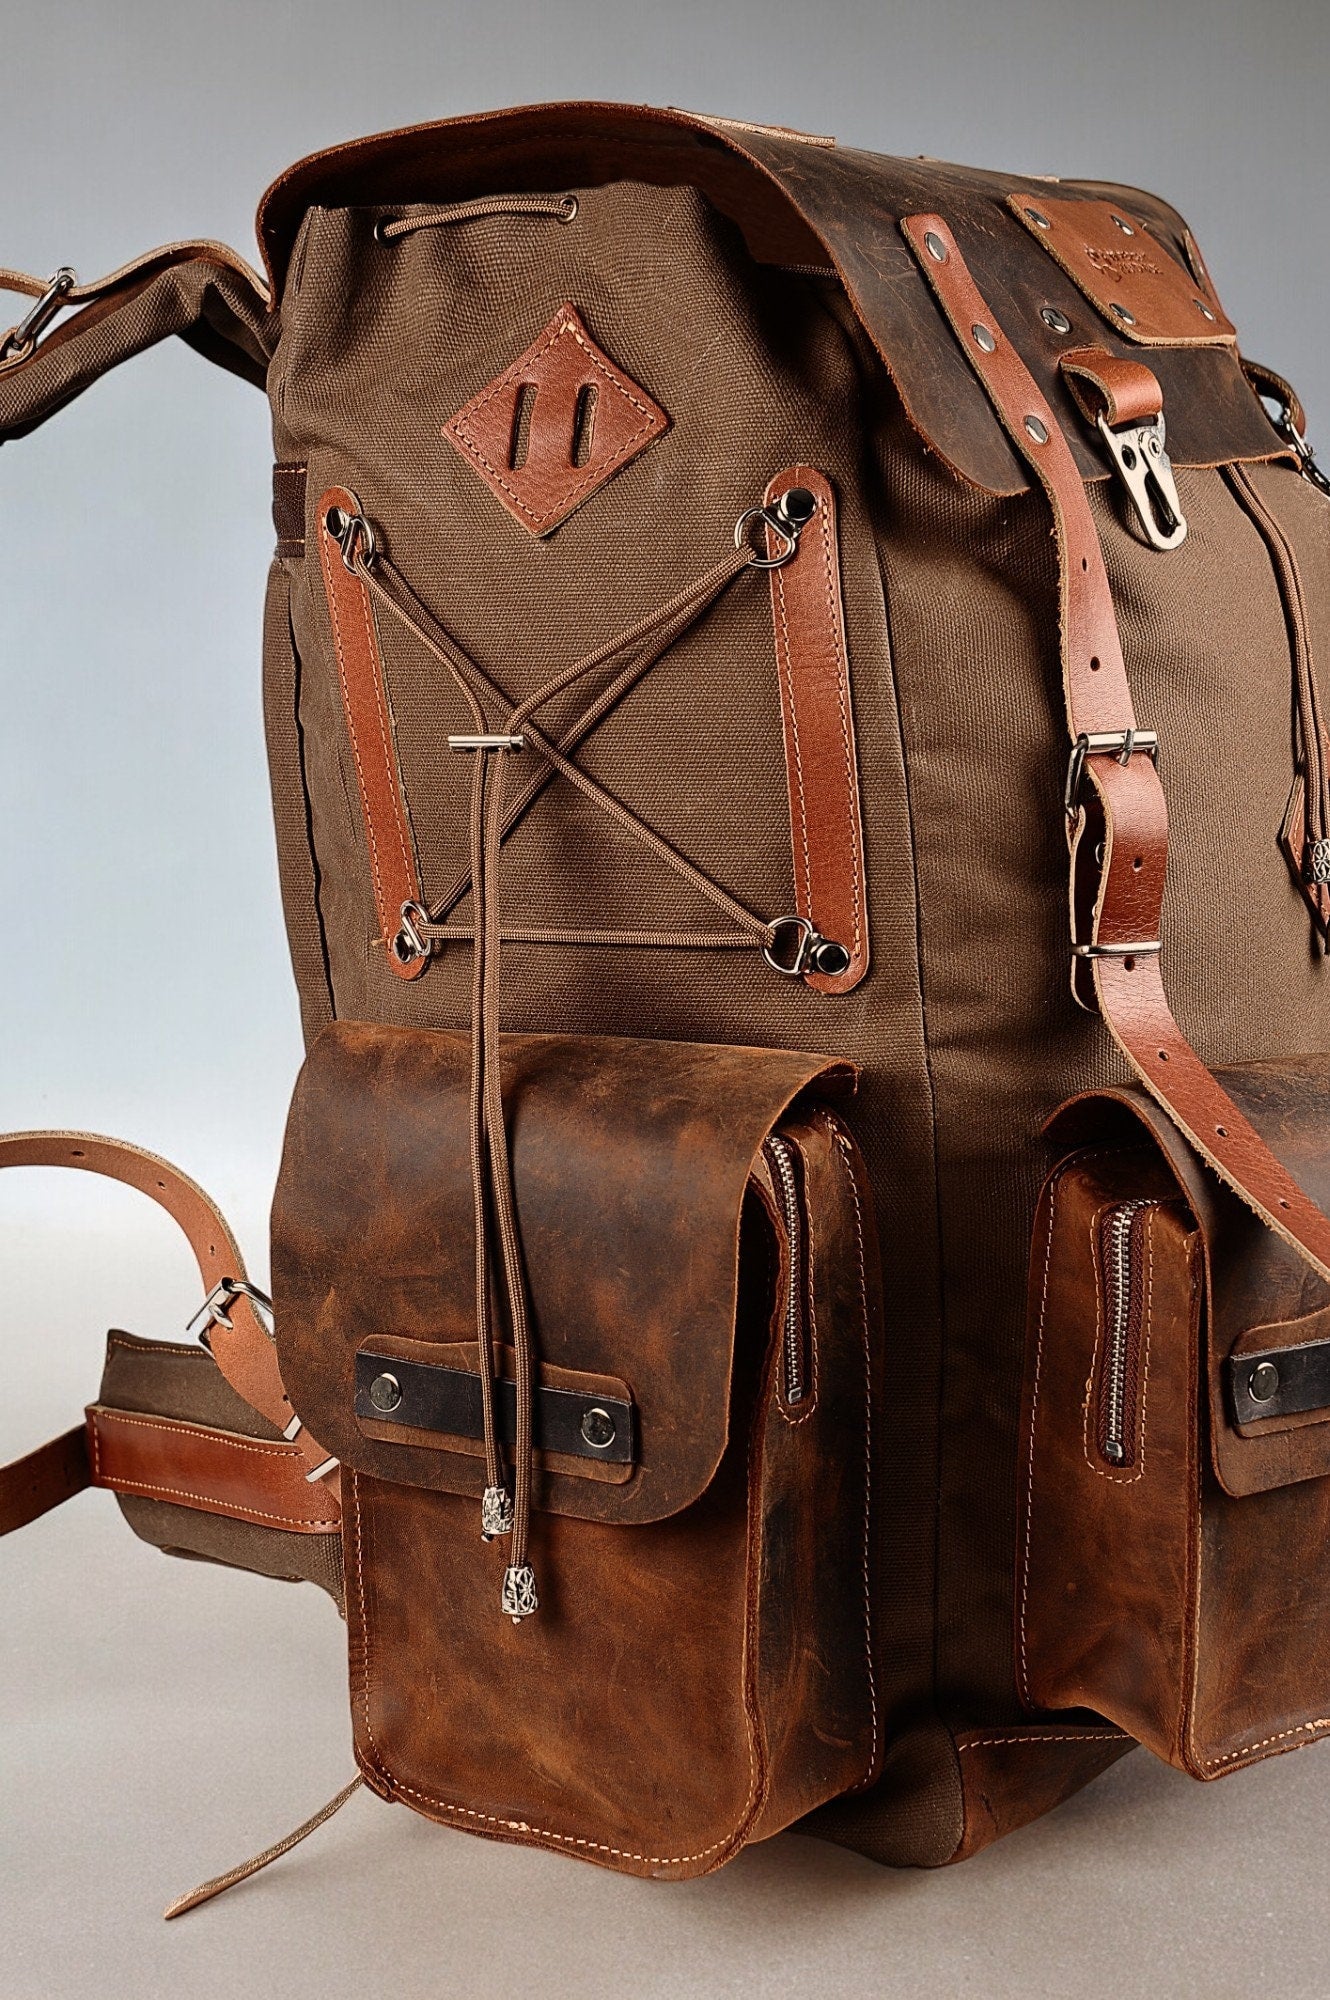 Daypack Laptop Backpack Handmade Waxed Canvas and Leather, 40L-50L Size Options  99percenthandmade   